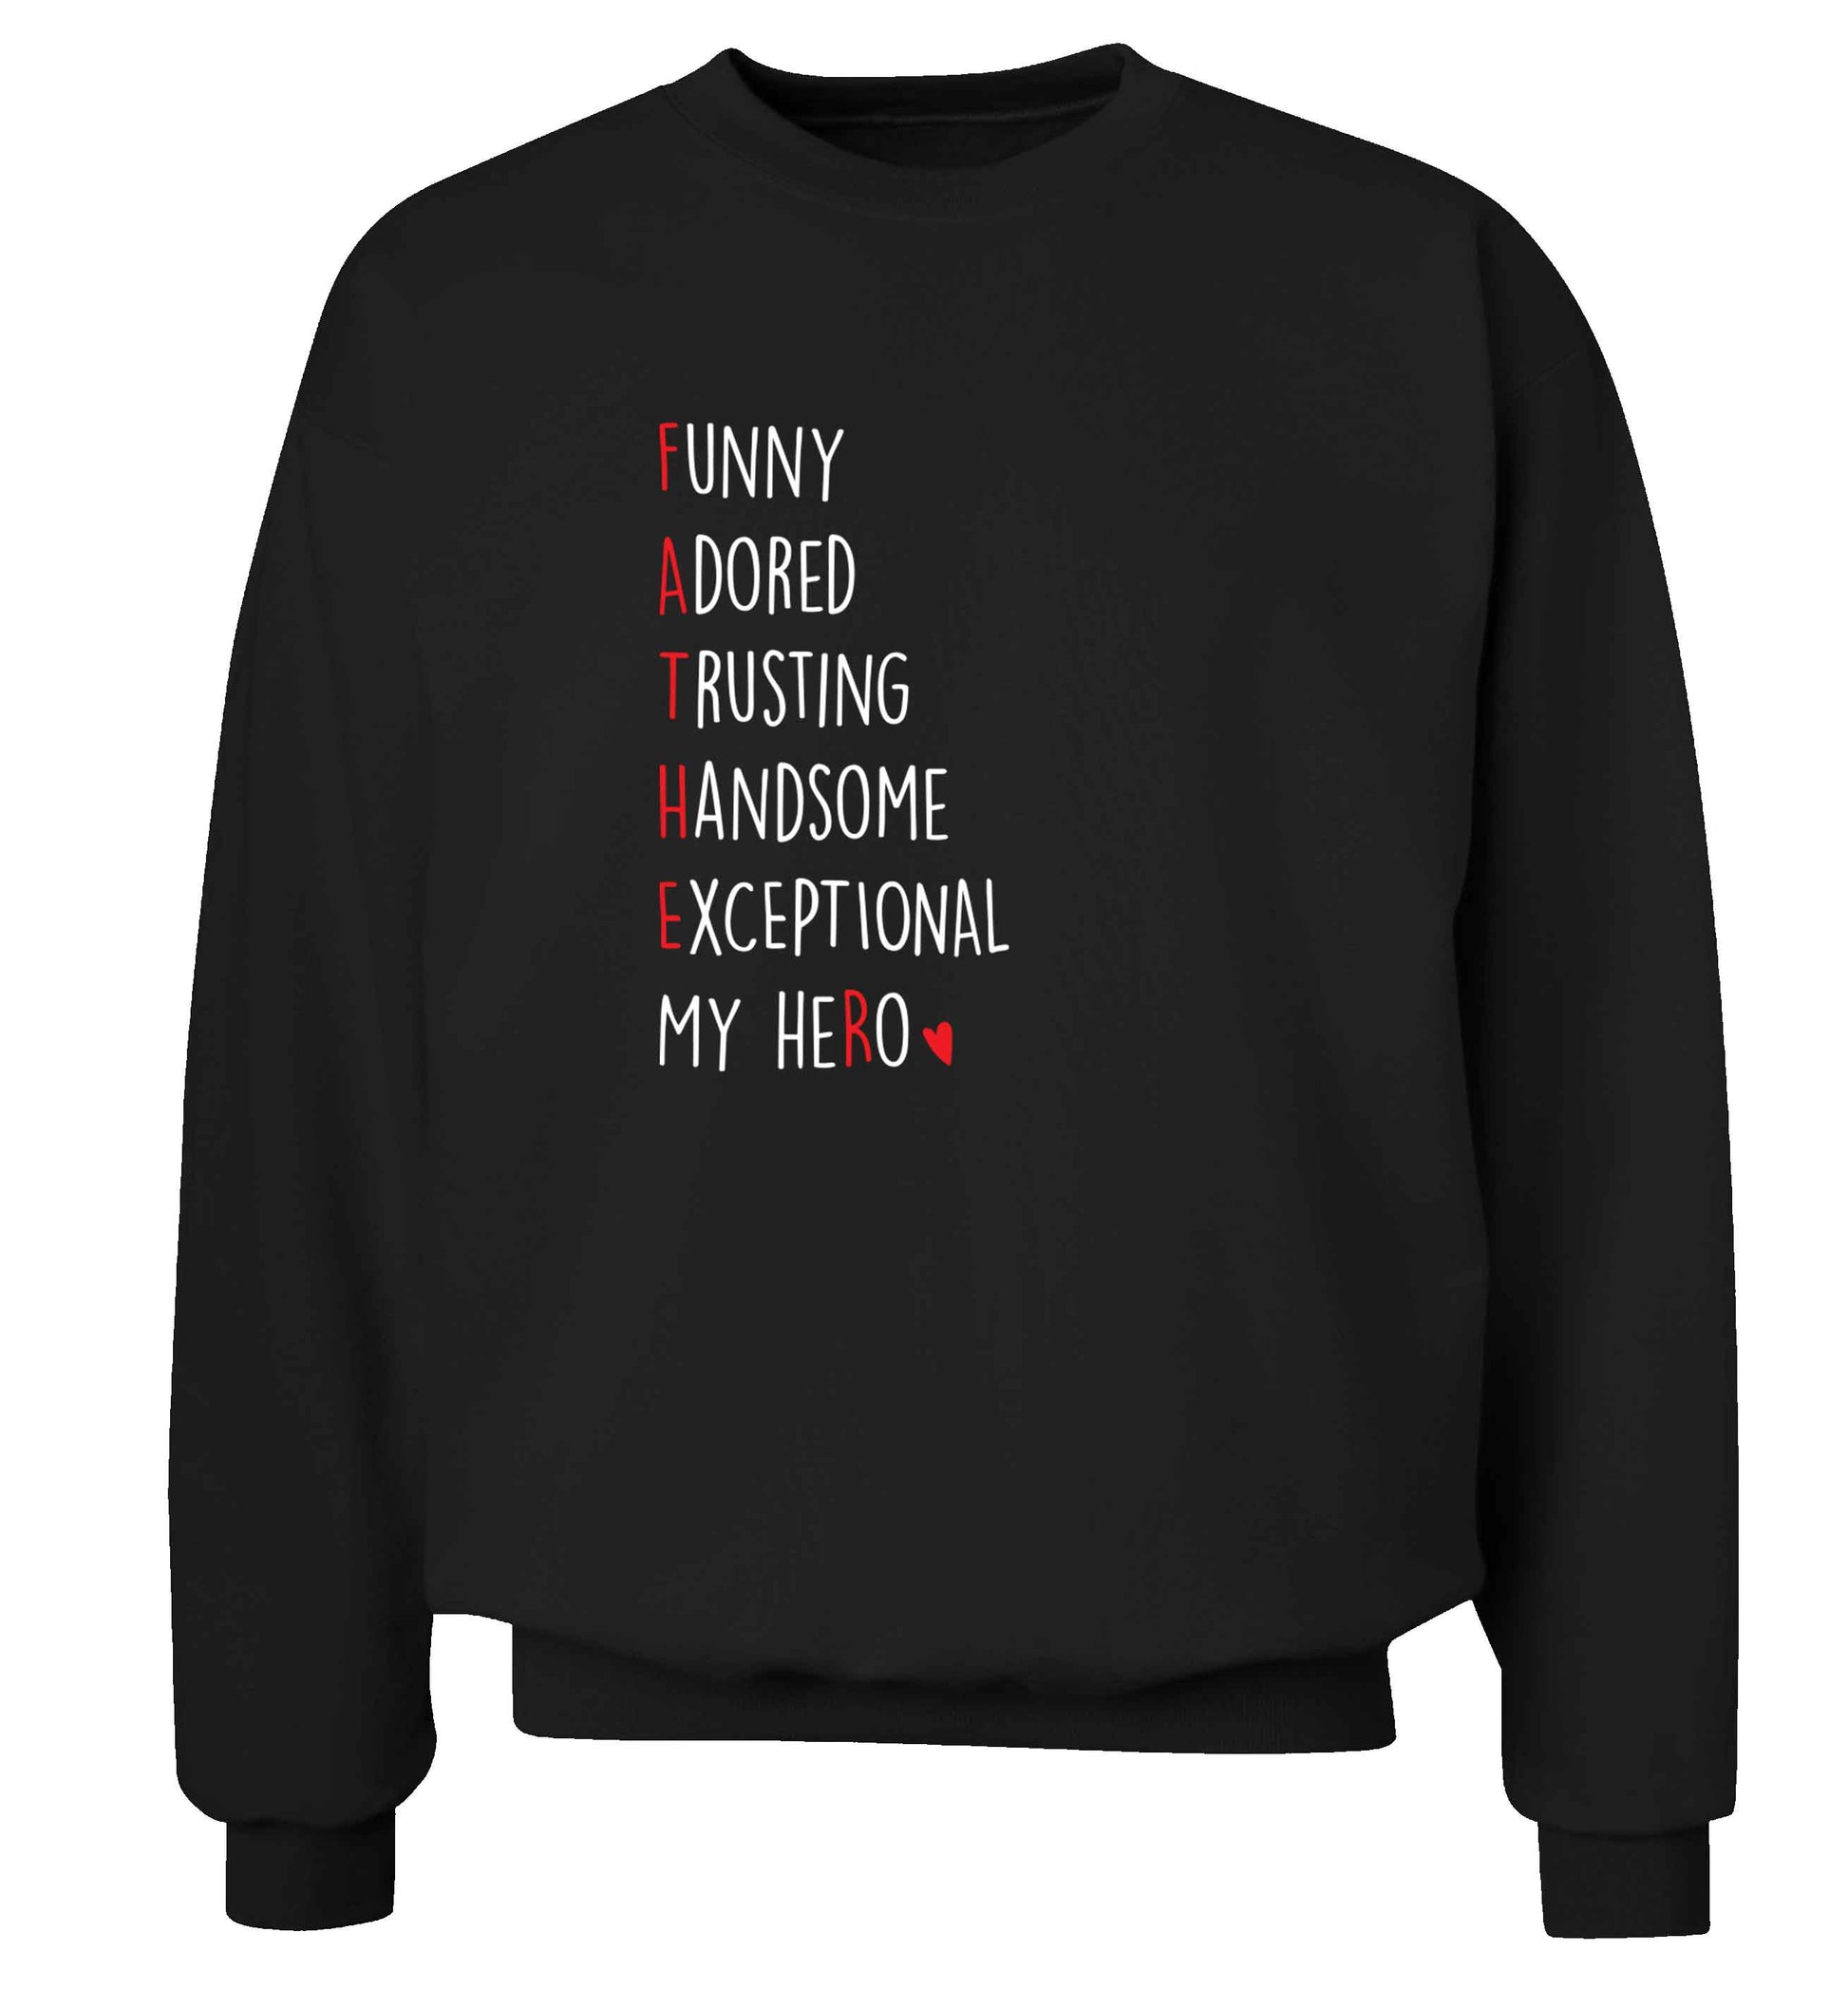 Father, funny adored trusting handsome exceptional my hero adult's unisex black sweater 2XL